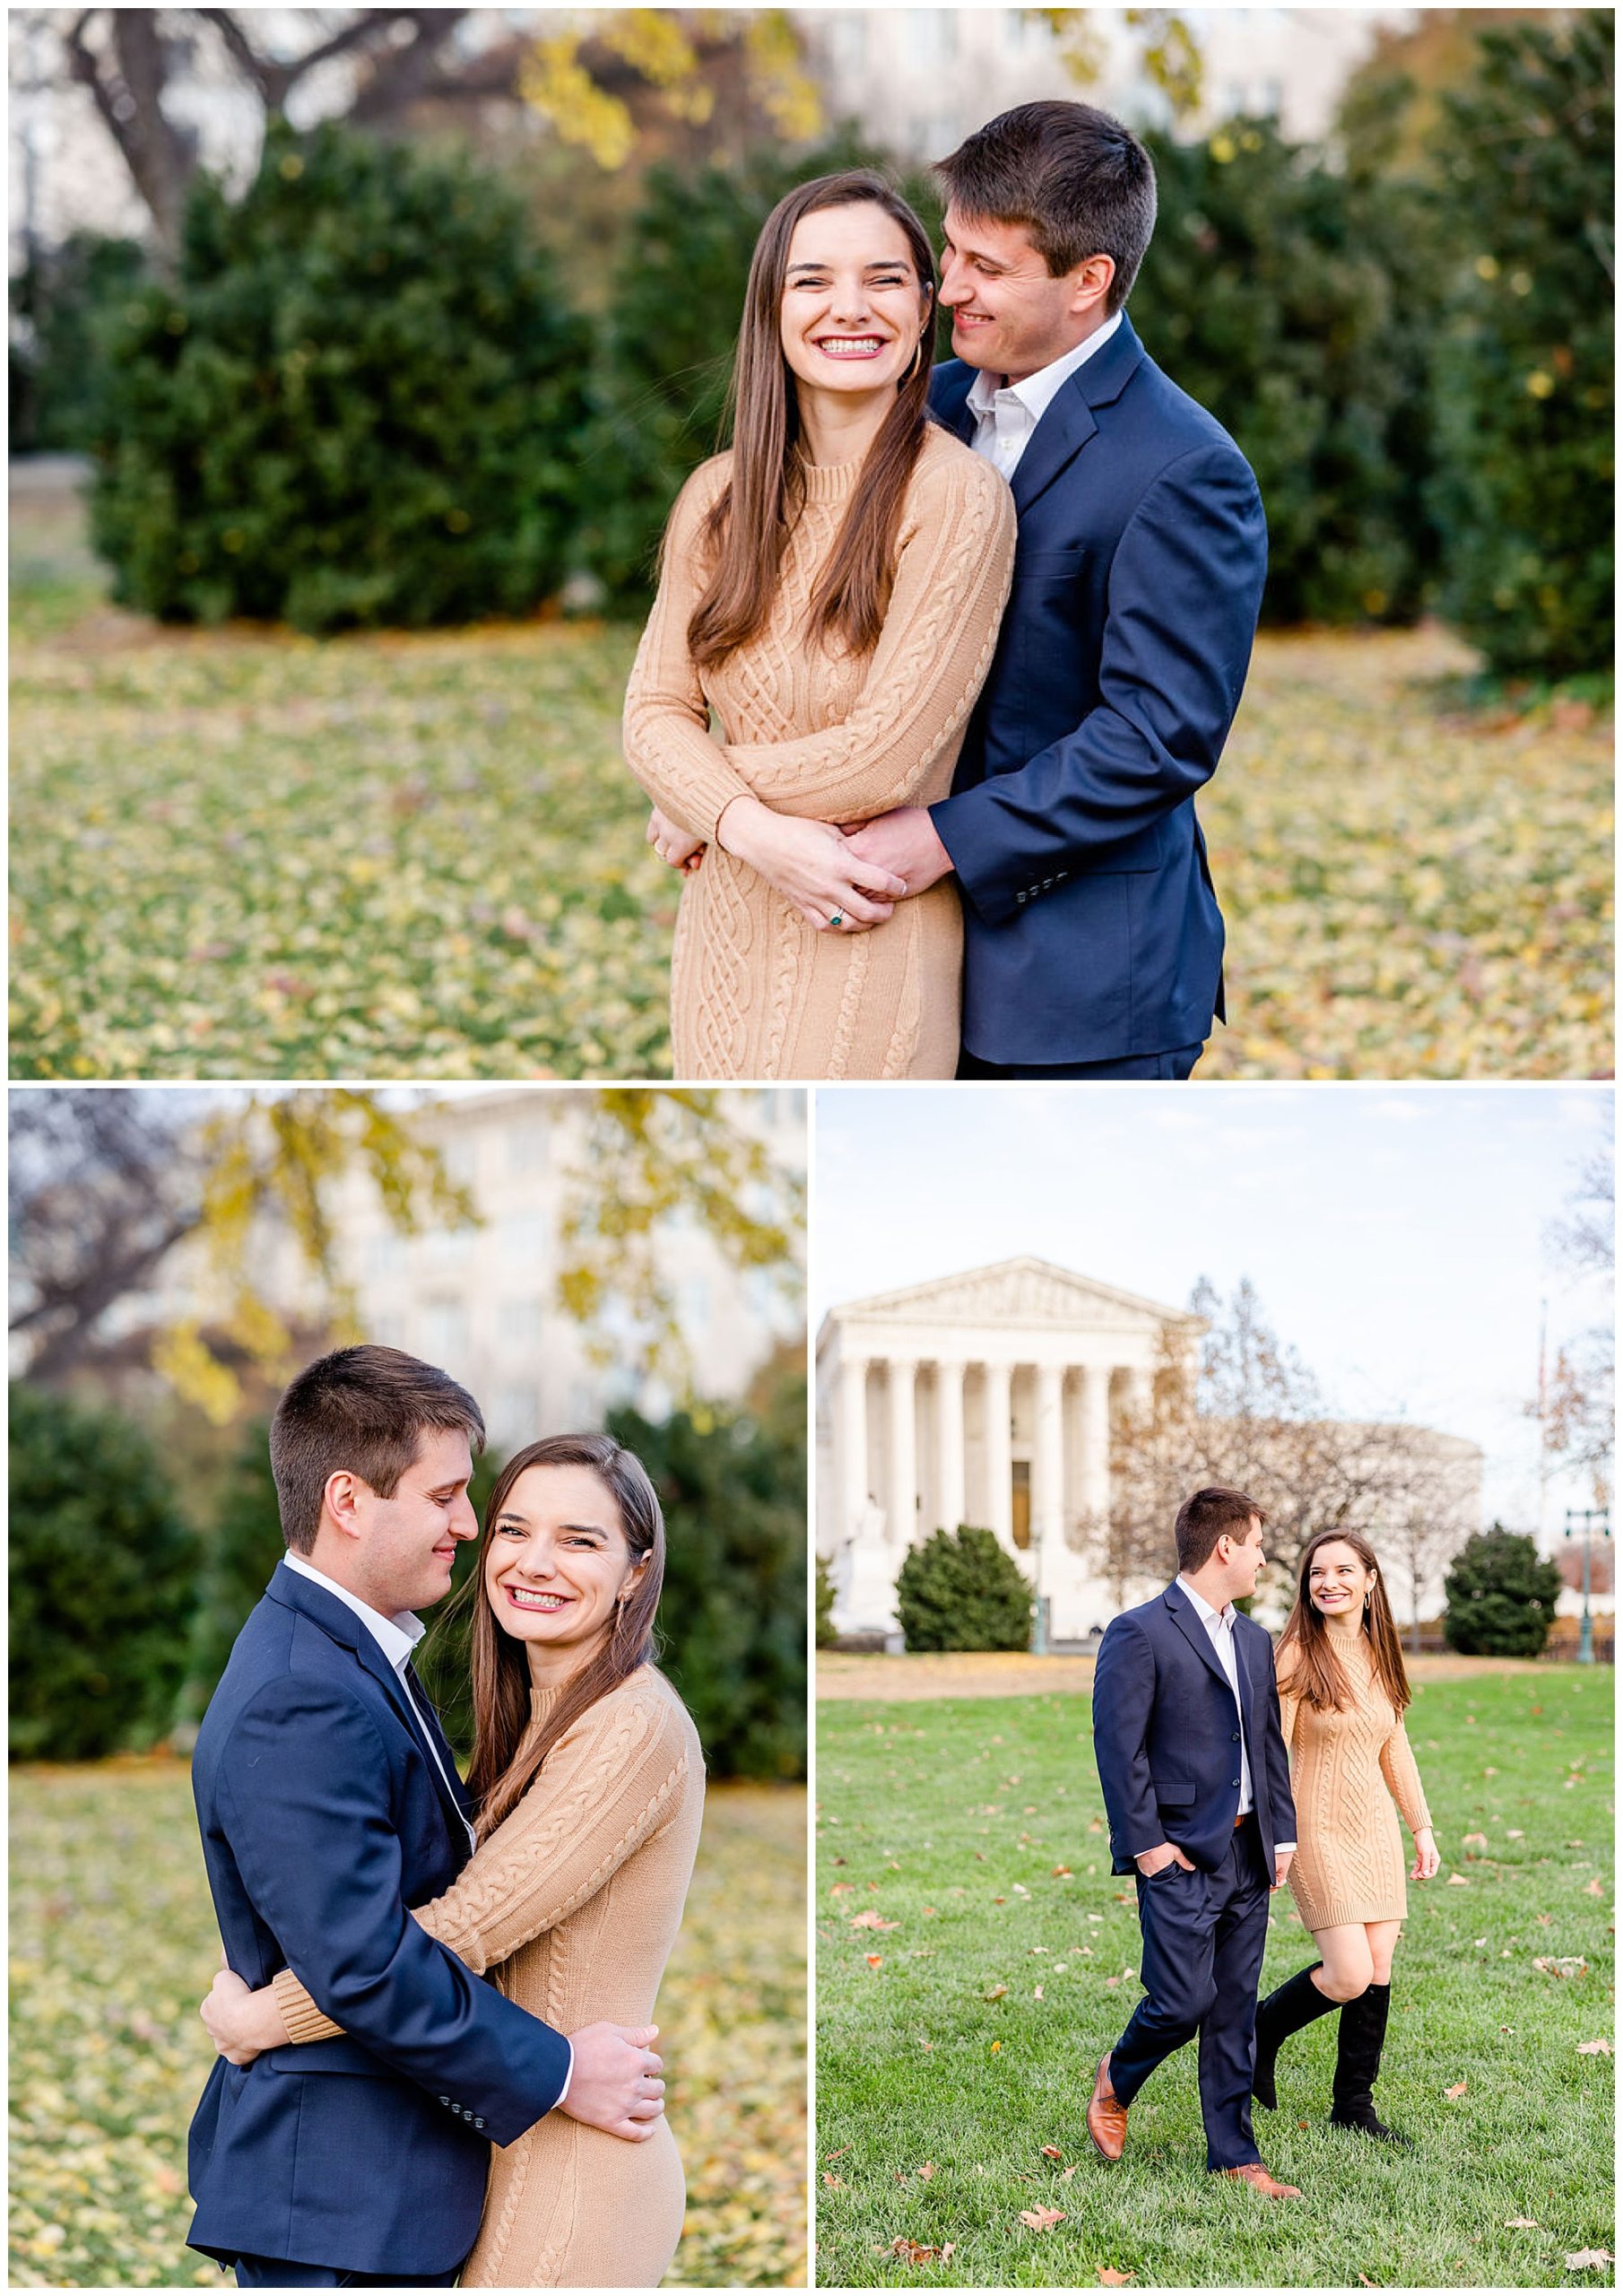 autumn Capitol Hill engagement session, Capitol Hill engagement photos, Capitol Hill photographer, DC engagement photography, DC engagement photographer, DC wedding photography, autumn engagement photos, casual engagement photos, Rachel E.H. Photography, sweater dress, man hugging woman from behind, man touching nose to womans cheek, couple holding hands